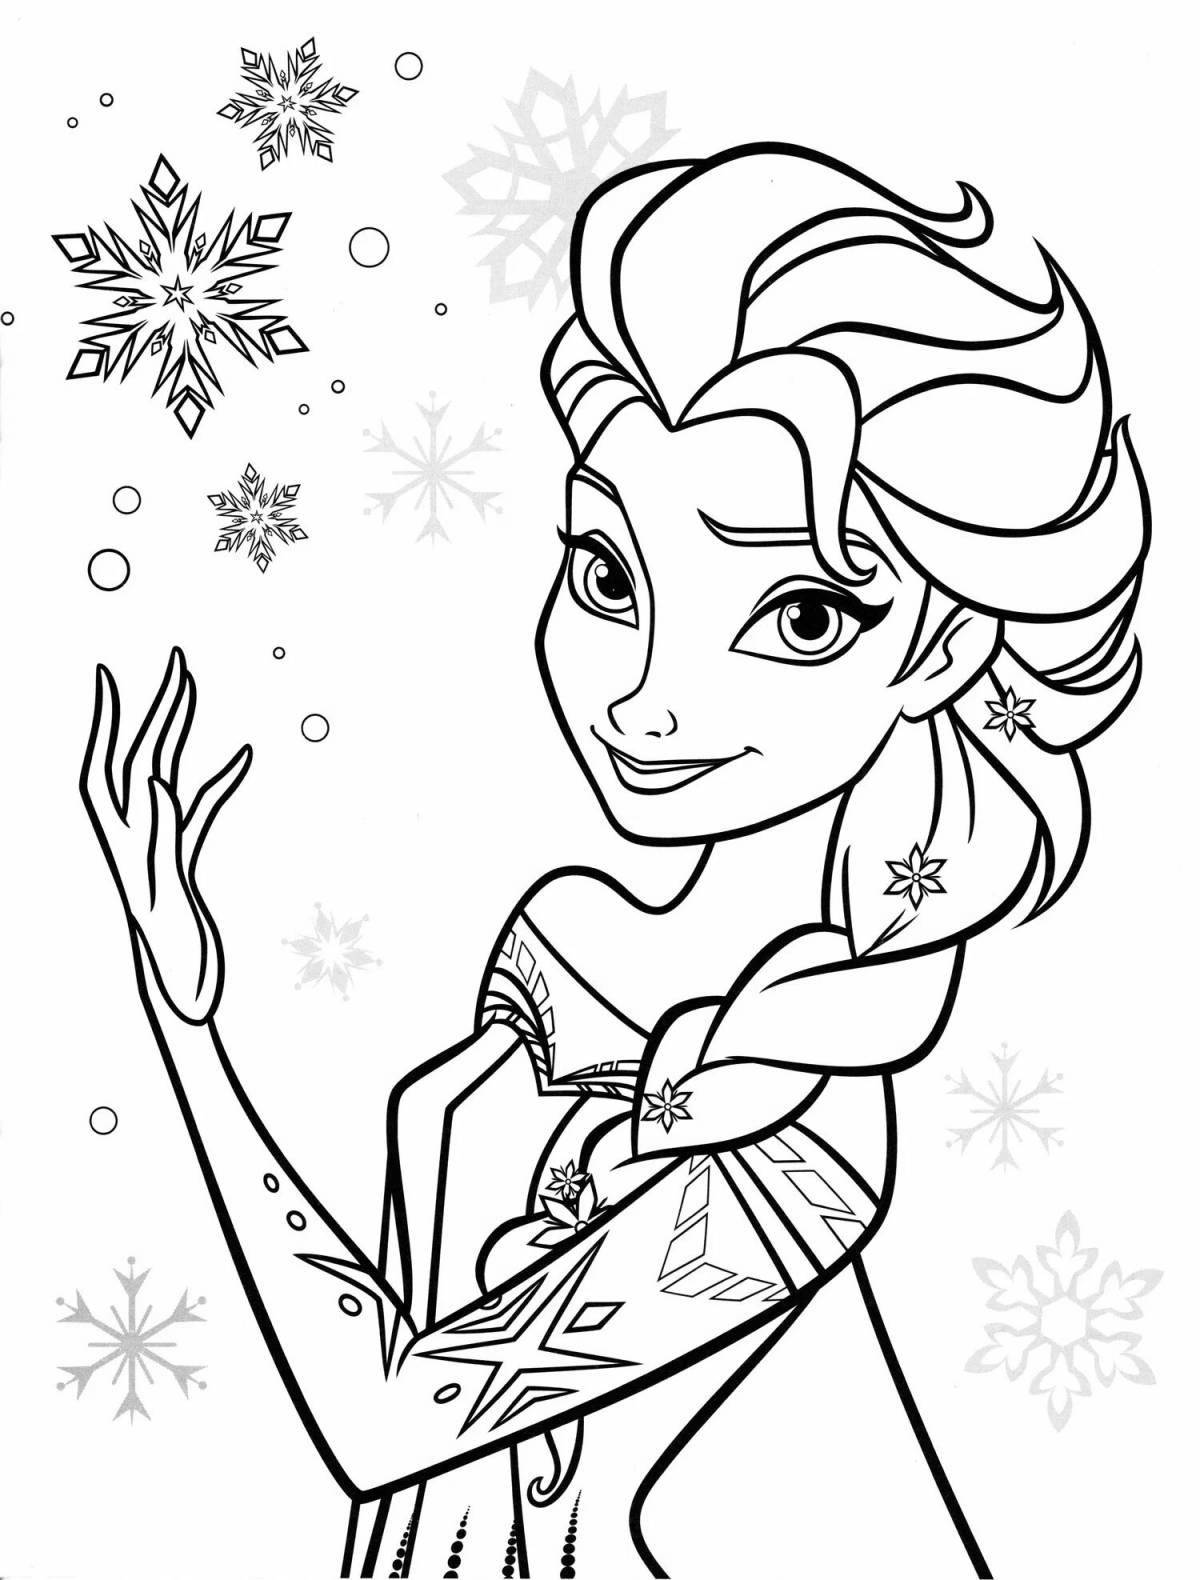 Elsa amazing coloring game for girls